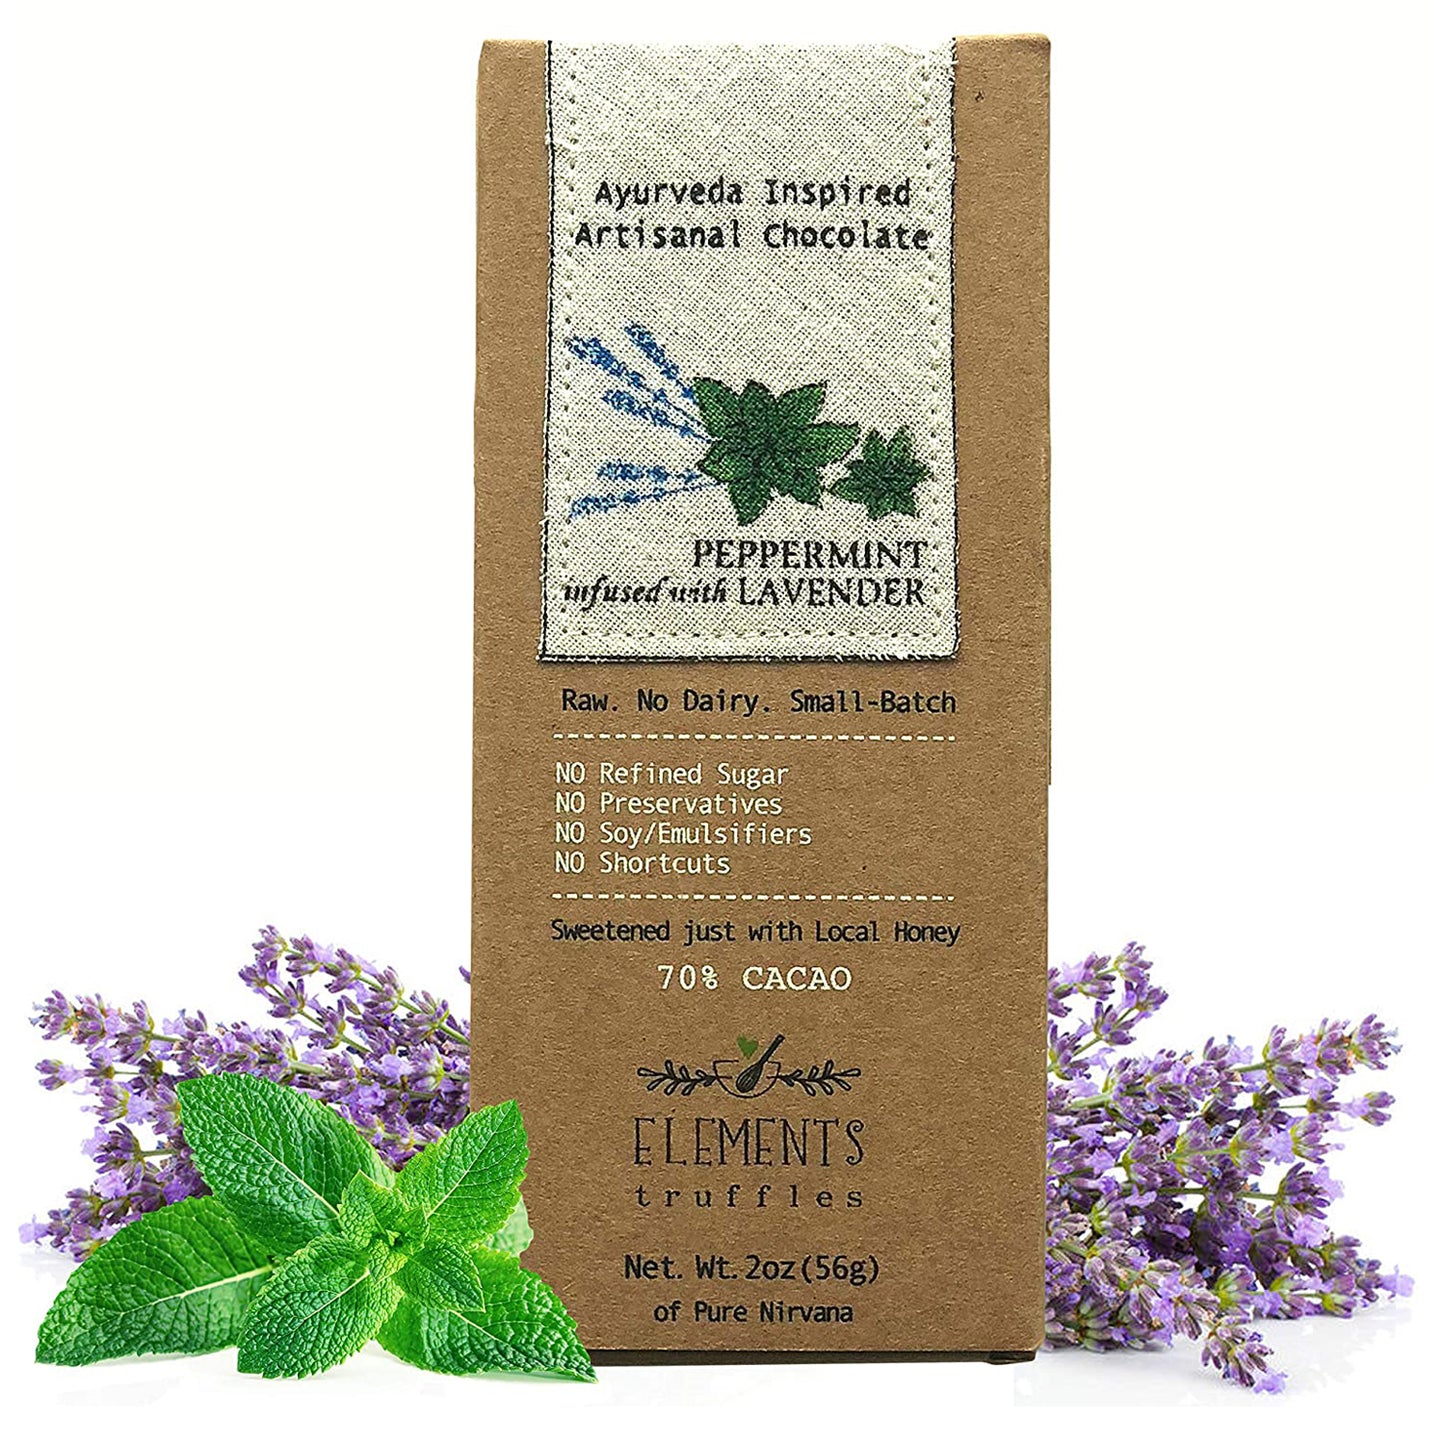 Peppermint with Lavender